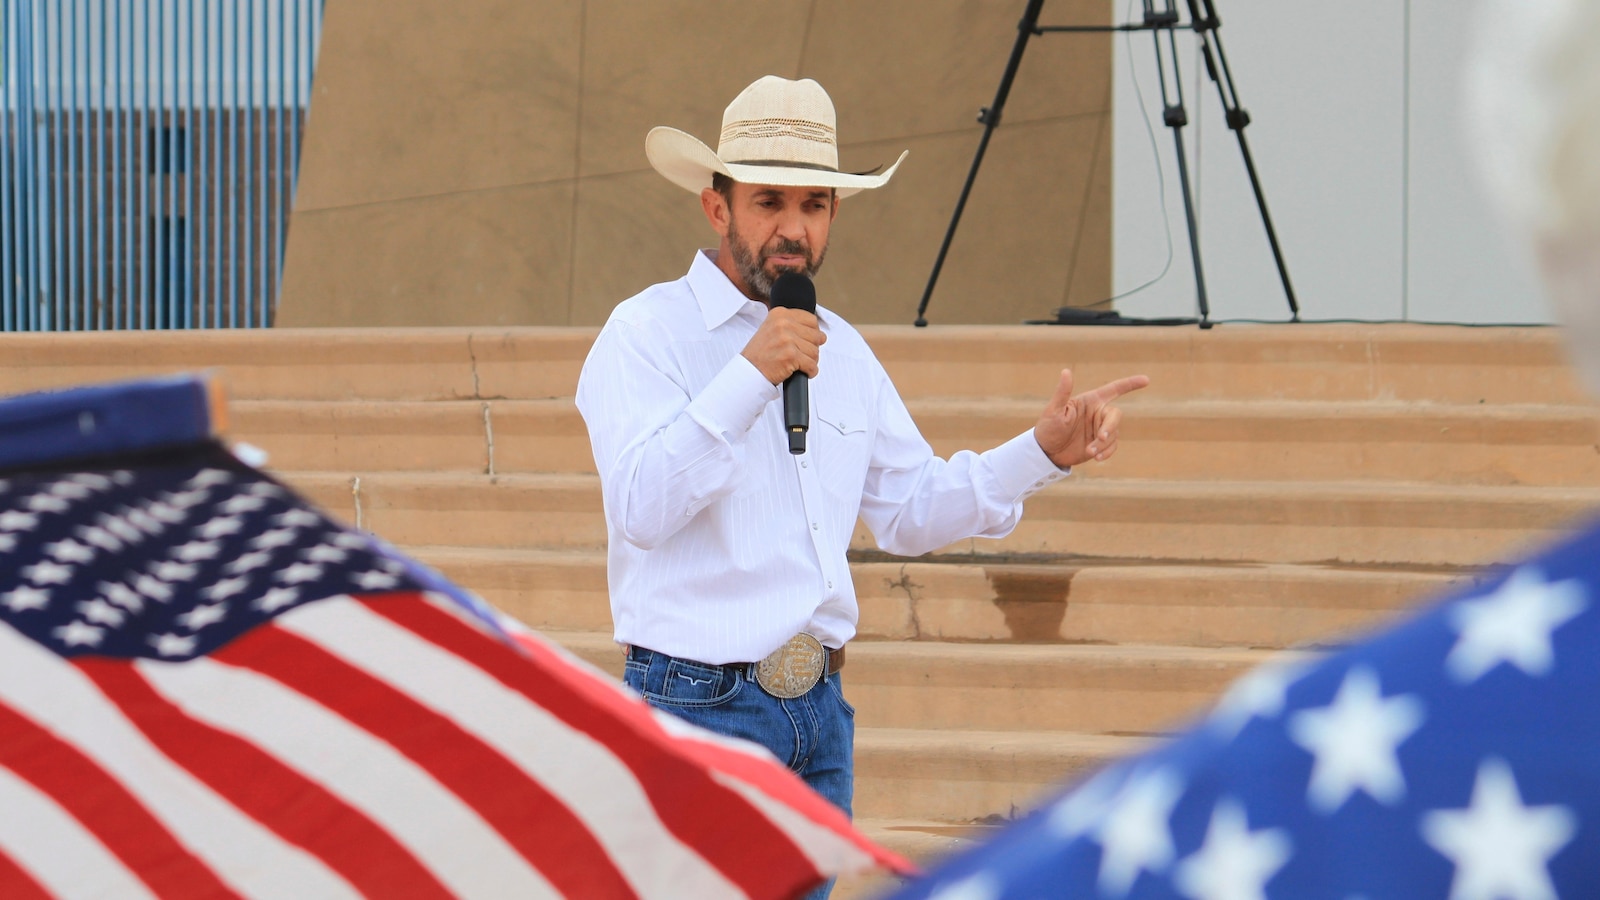 Former New Mexico county commissioner's appeal rejected by Supreme Court due to involvement in Jan. 6 insurrection